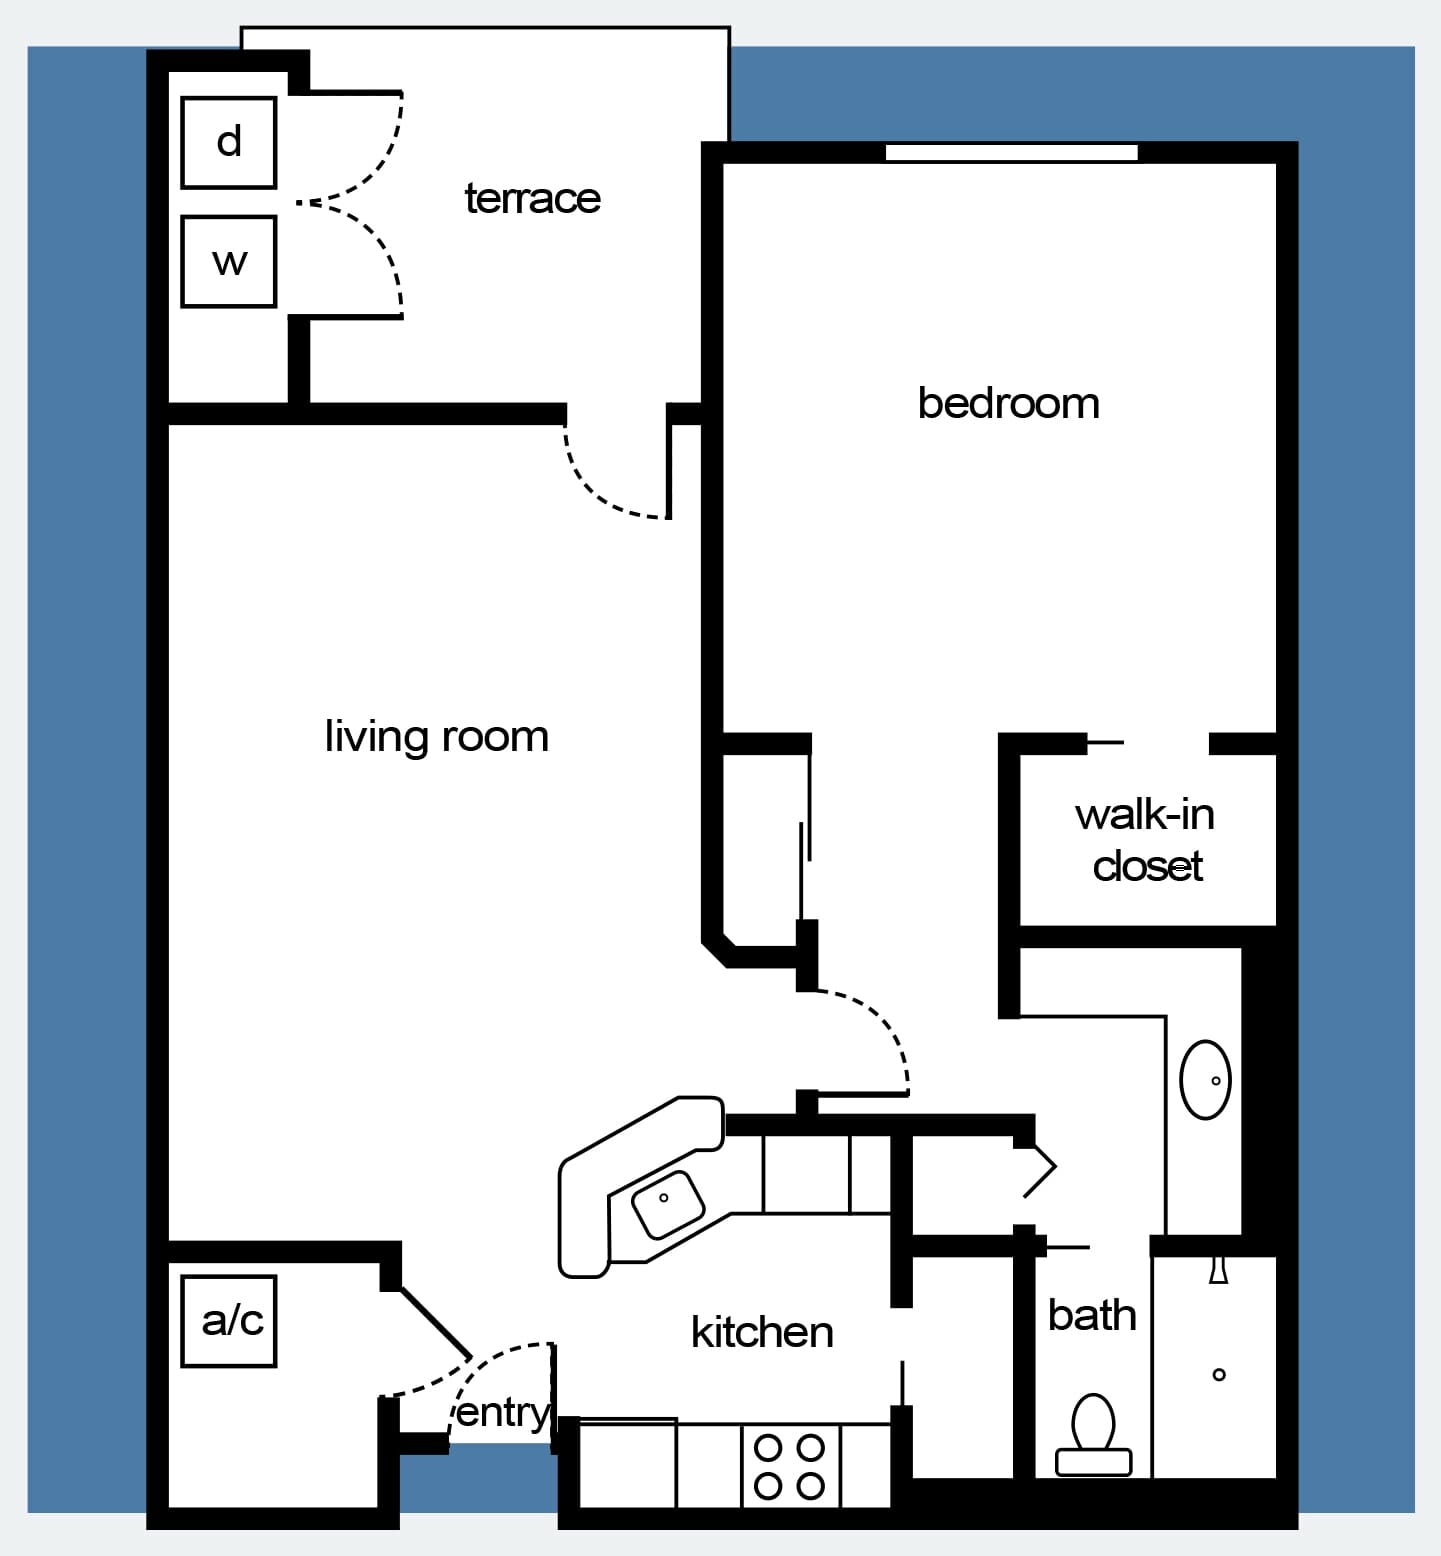 Floorplan of one bedroom apartment with living room and terrace